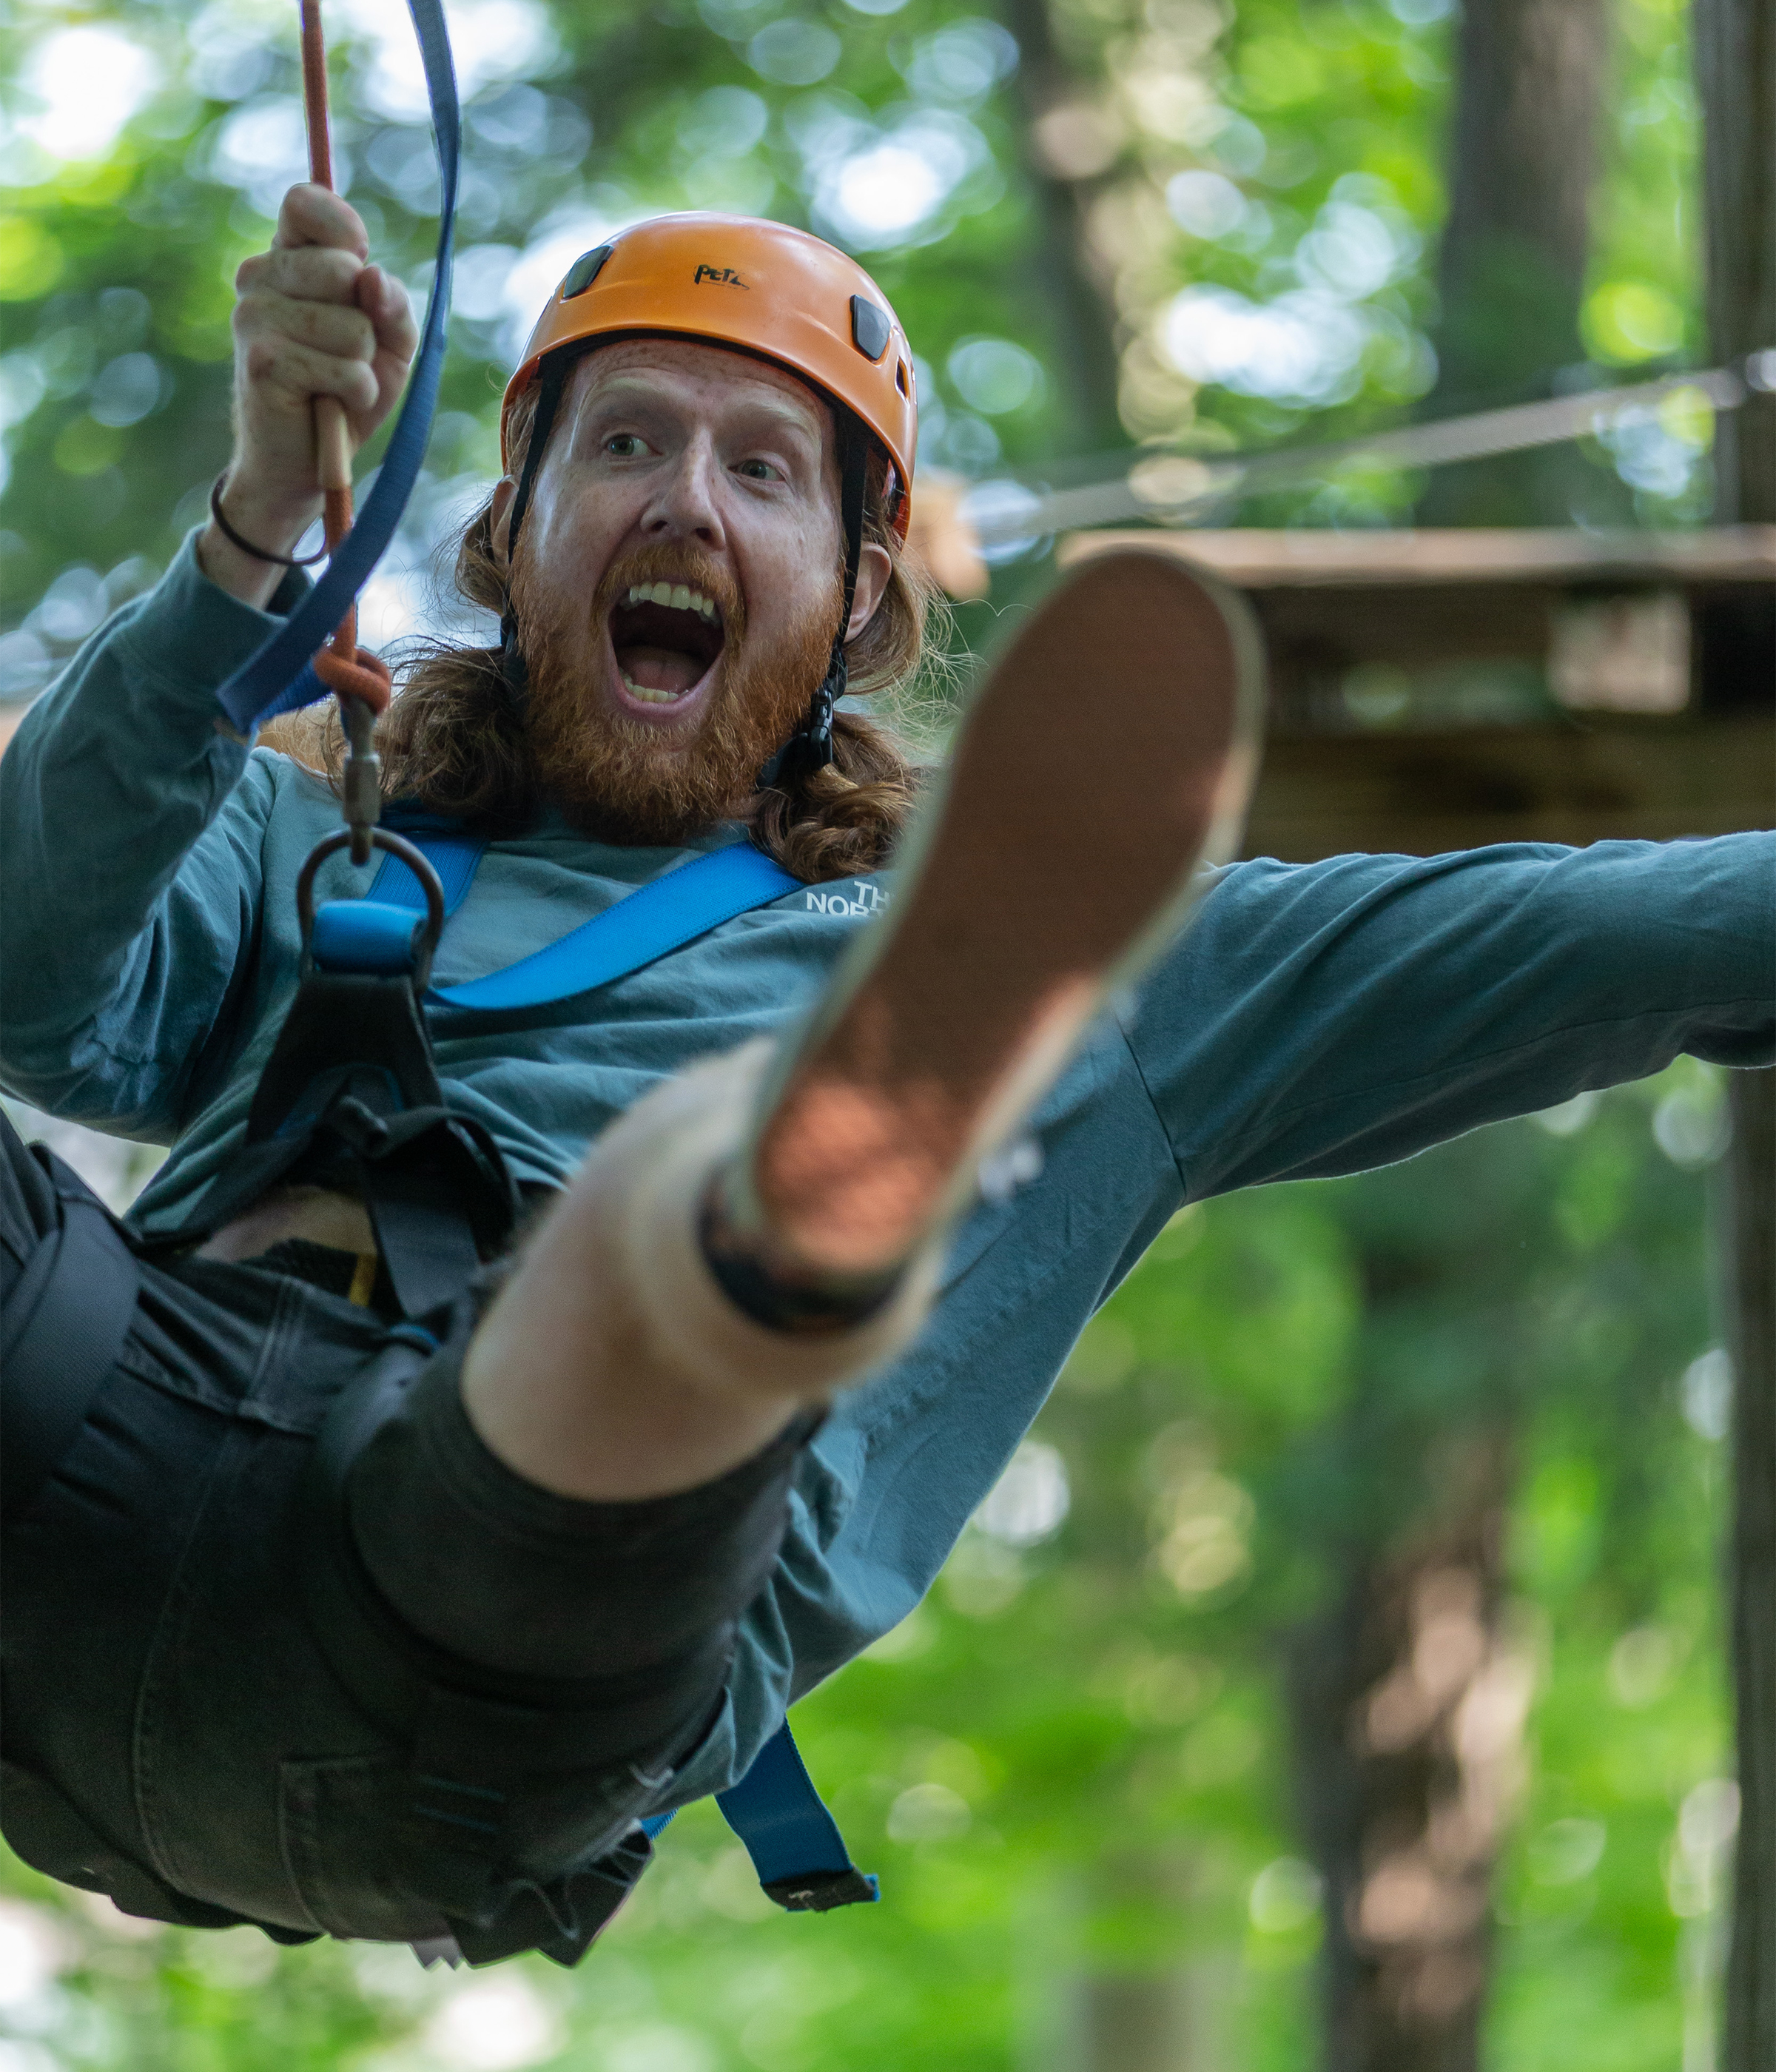 Man with a surprised expression enjoying a zip line adventure through a forest.